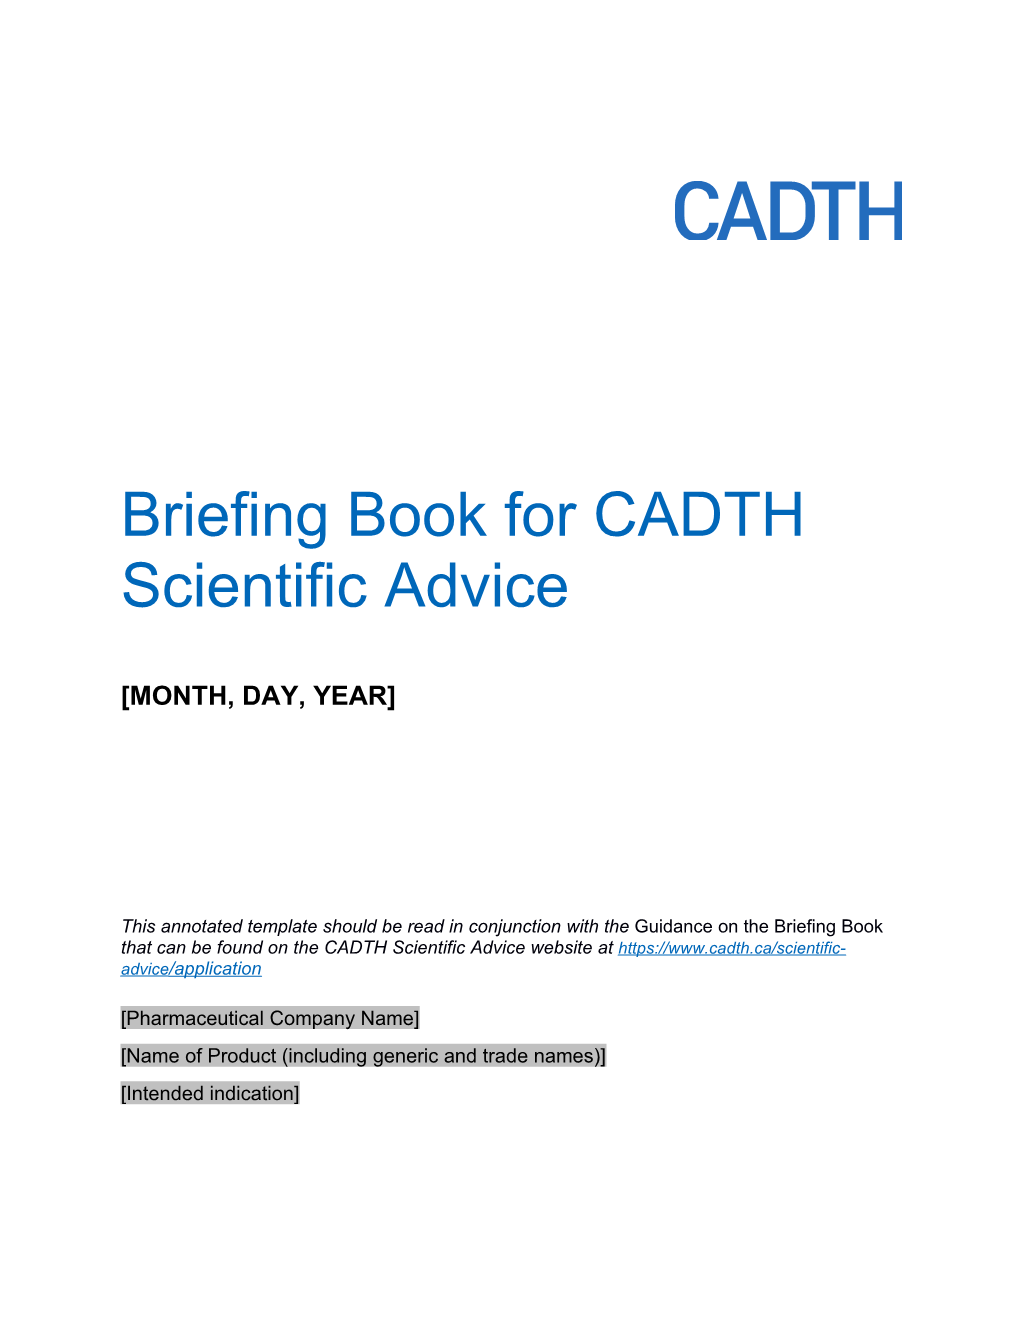 Briefing Book for CADTH Scientific Advice